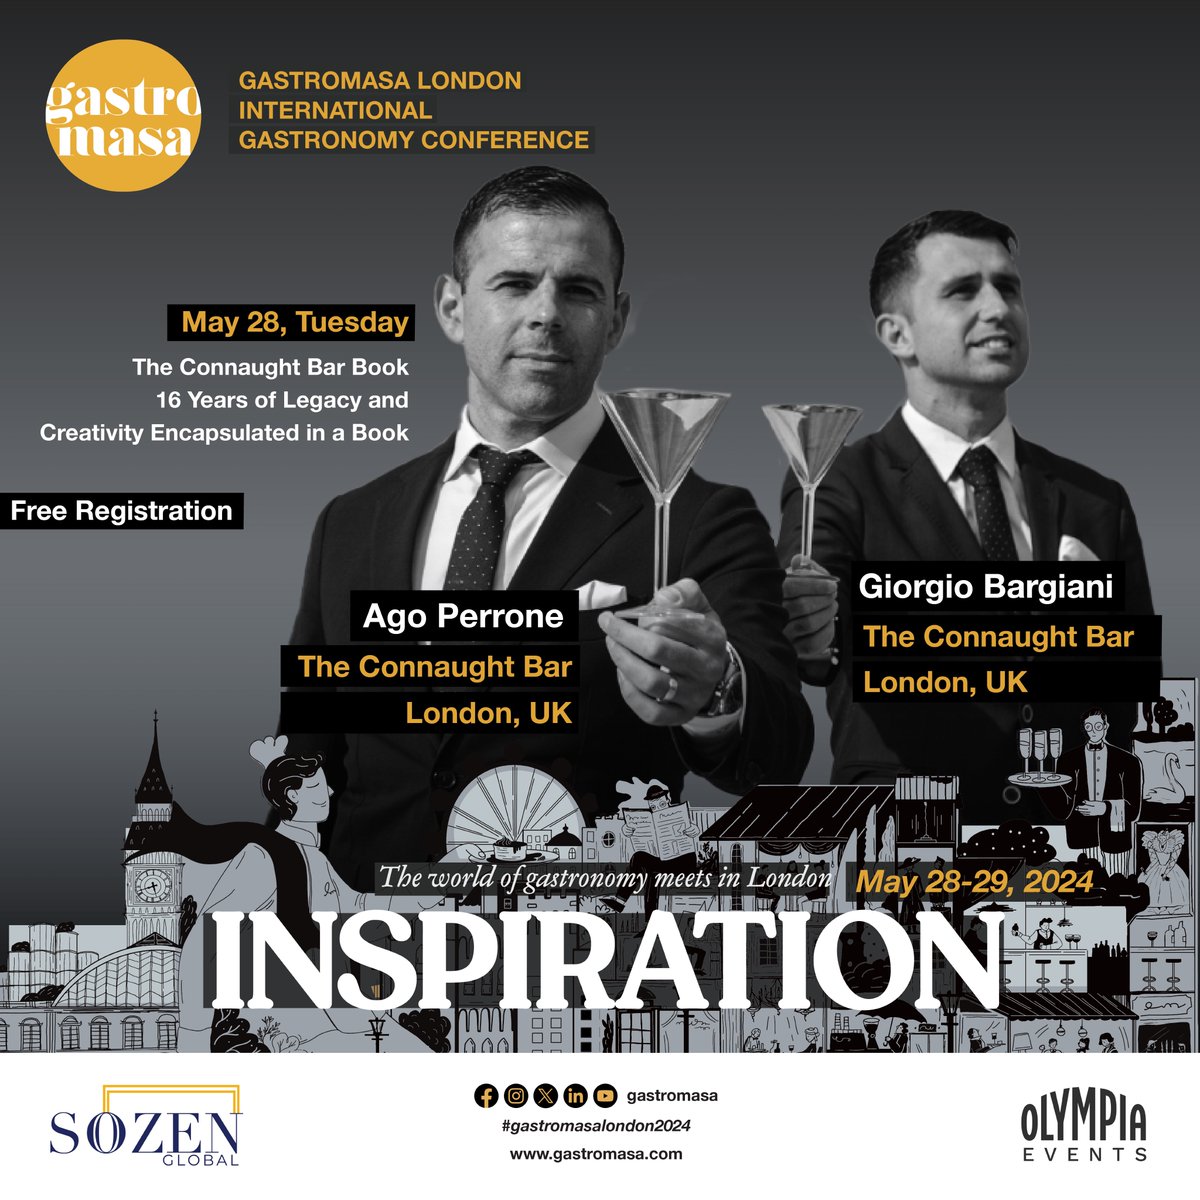 Ago Perrone and Giorgio Bargiani are coming to Gastromasa London!

Gastromasa will take place in London on 28-29 May 2024 at Olympia London with the theme of 'Inspiration'.

More information and free entrance, register the link: gastromasa.com/register